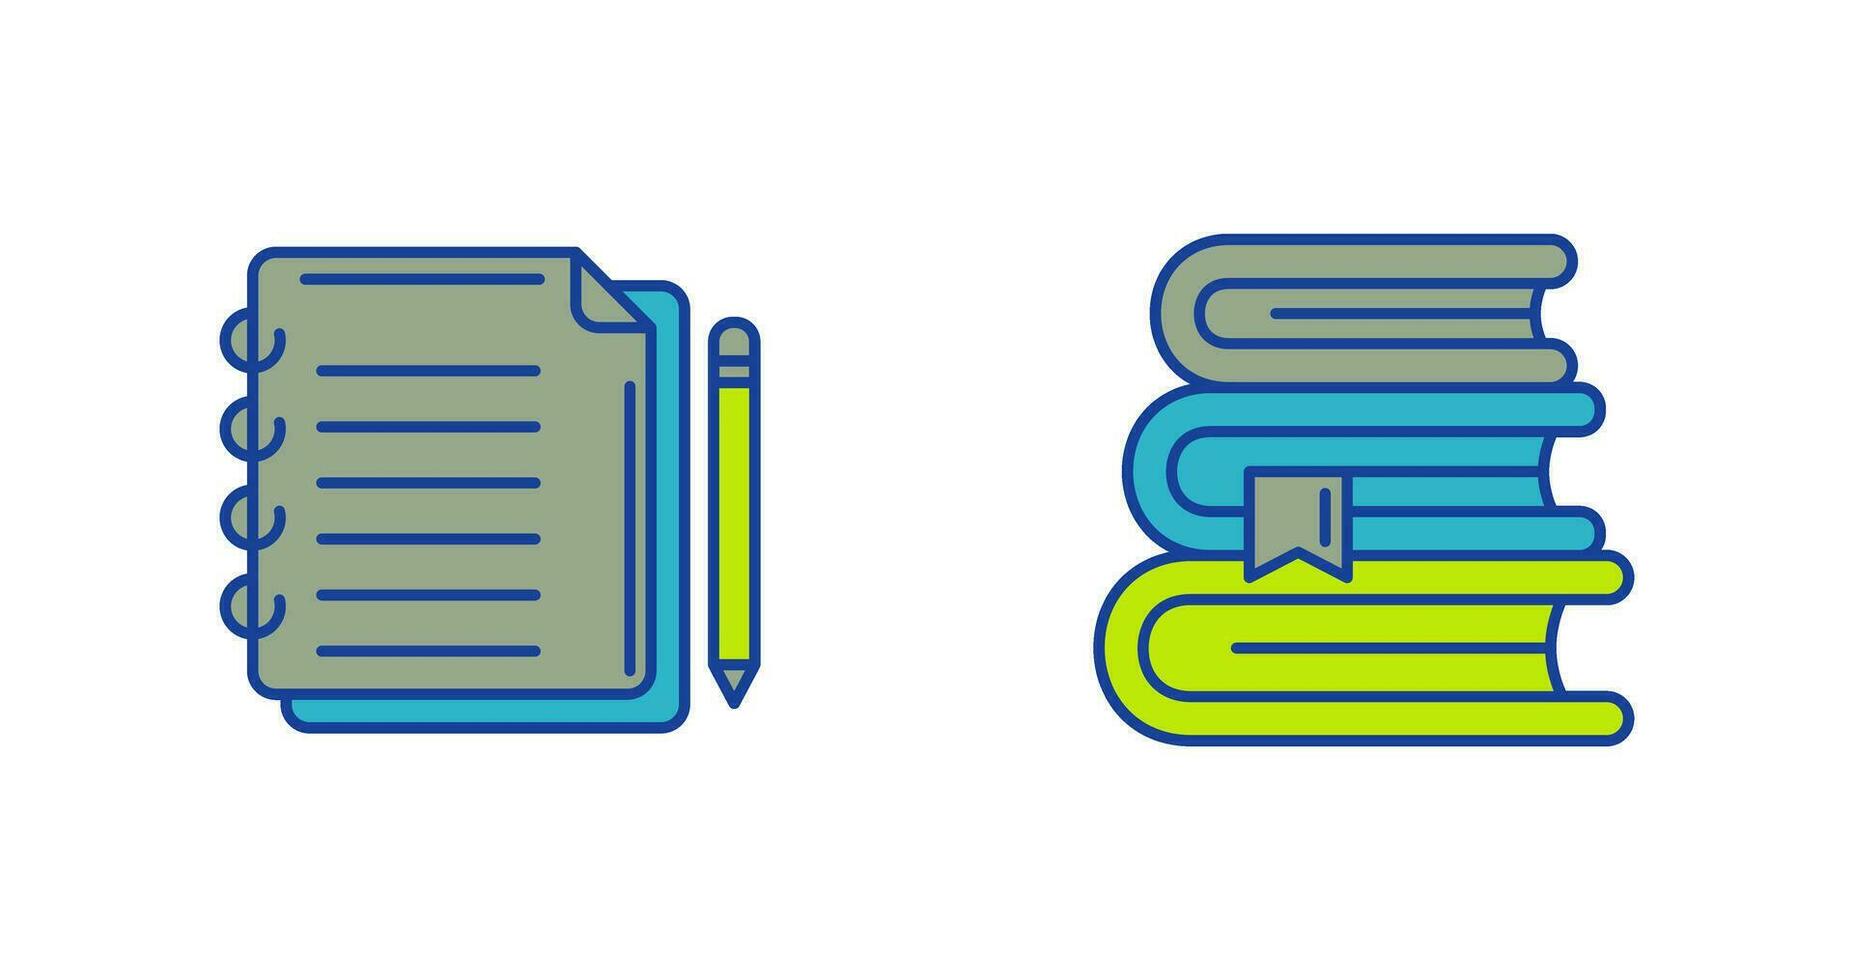 Write and Books Icon vector